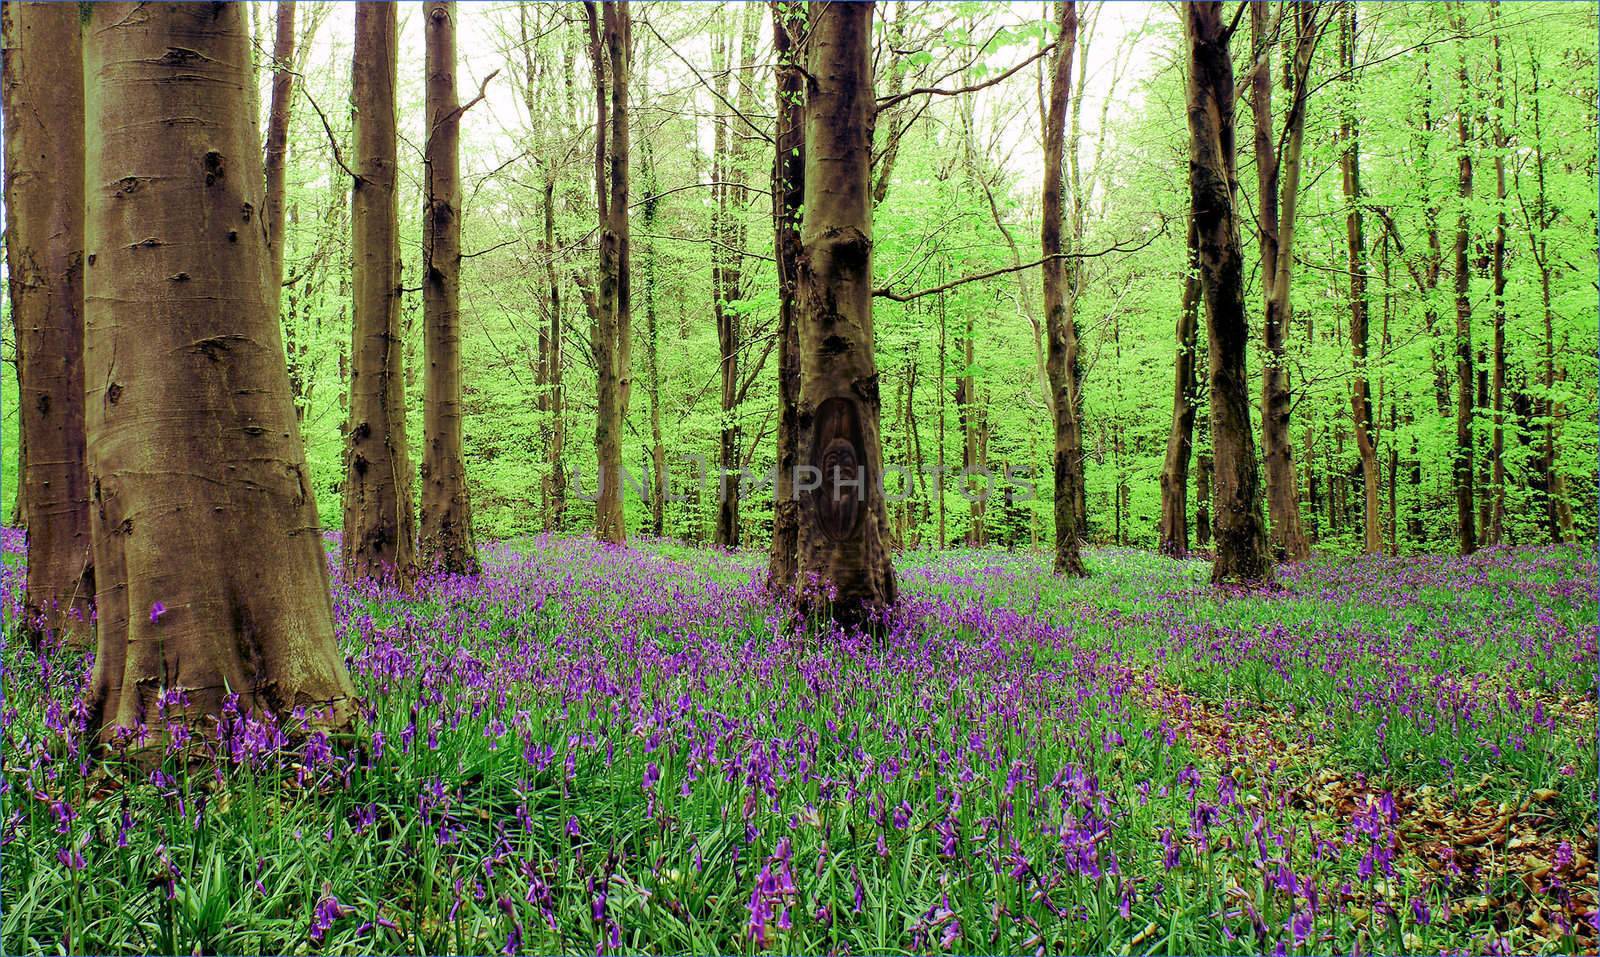 Bluebells in a beech wood with a sprite carved in a tree